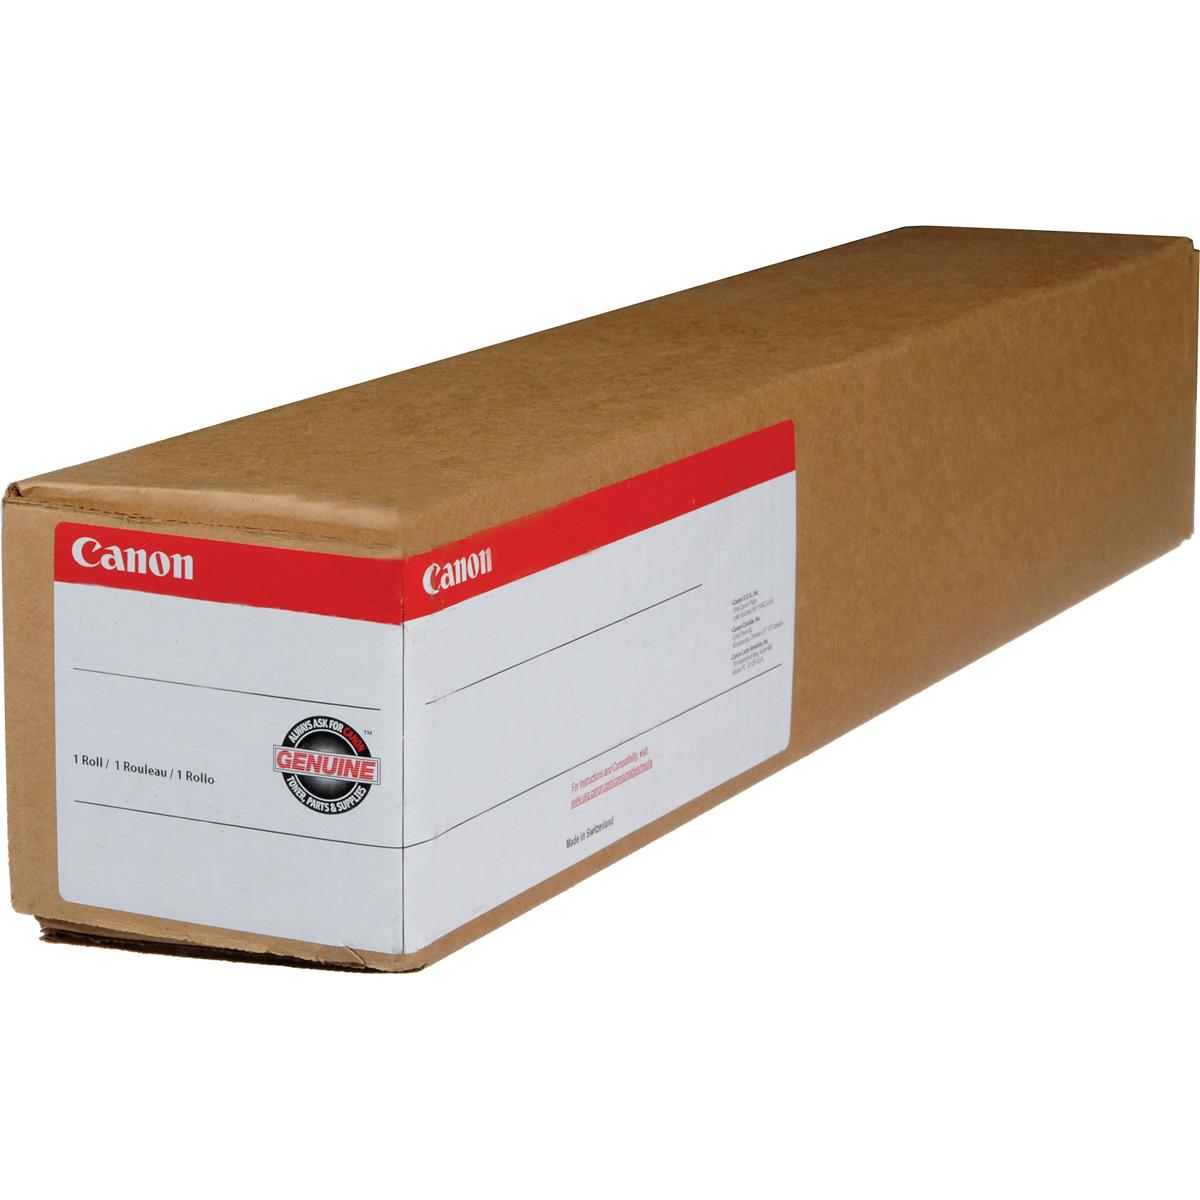 Image of Canon Roll-up Gloss Film Media